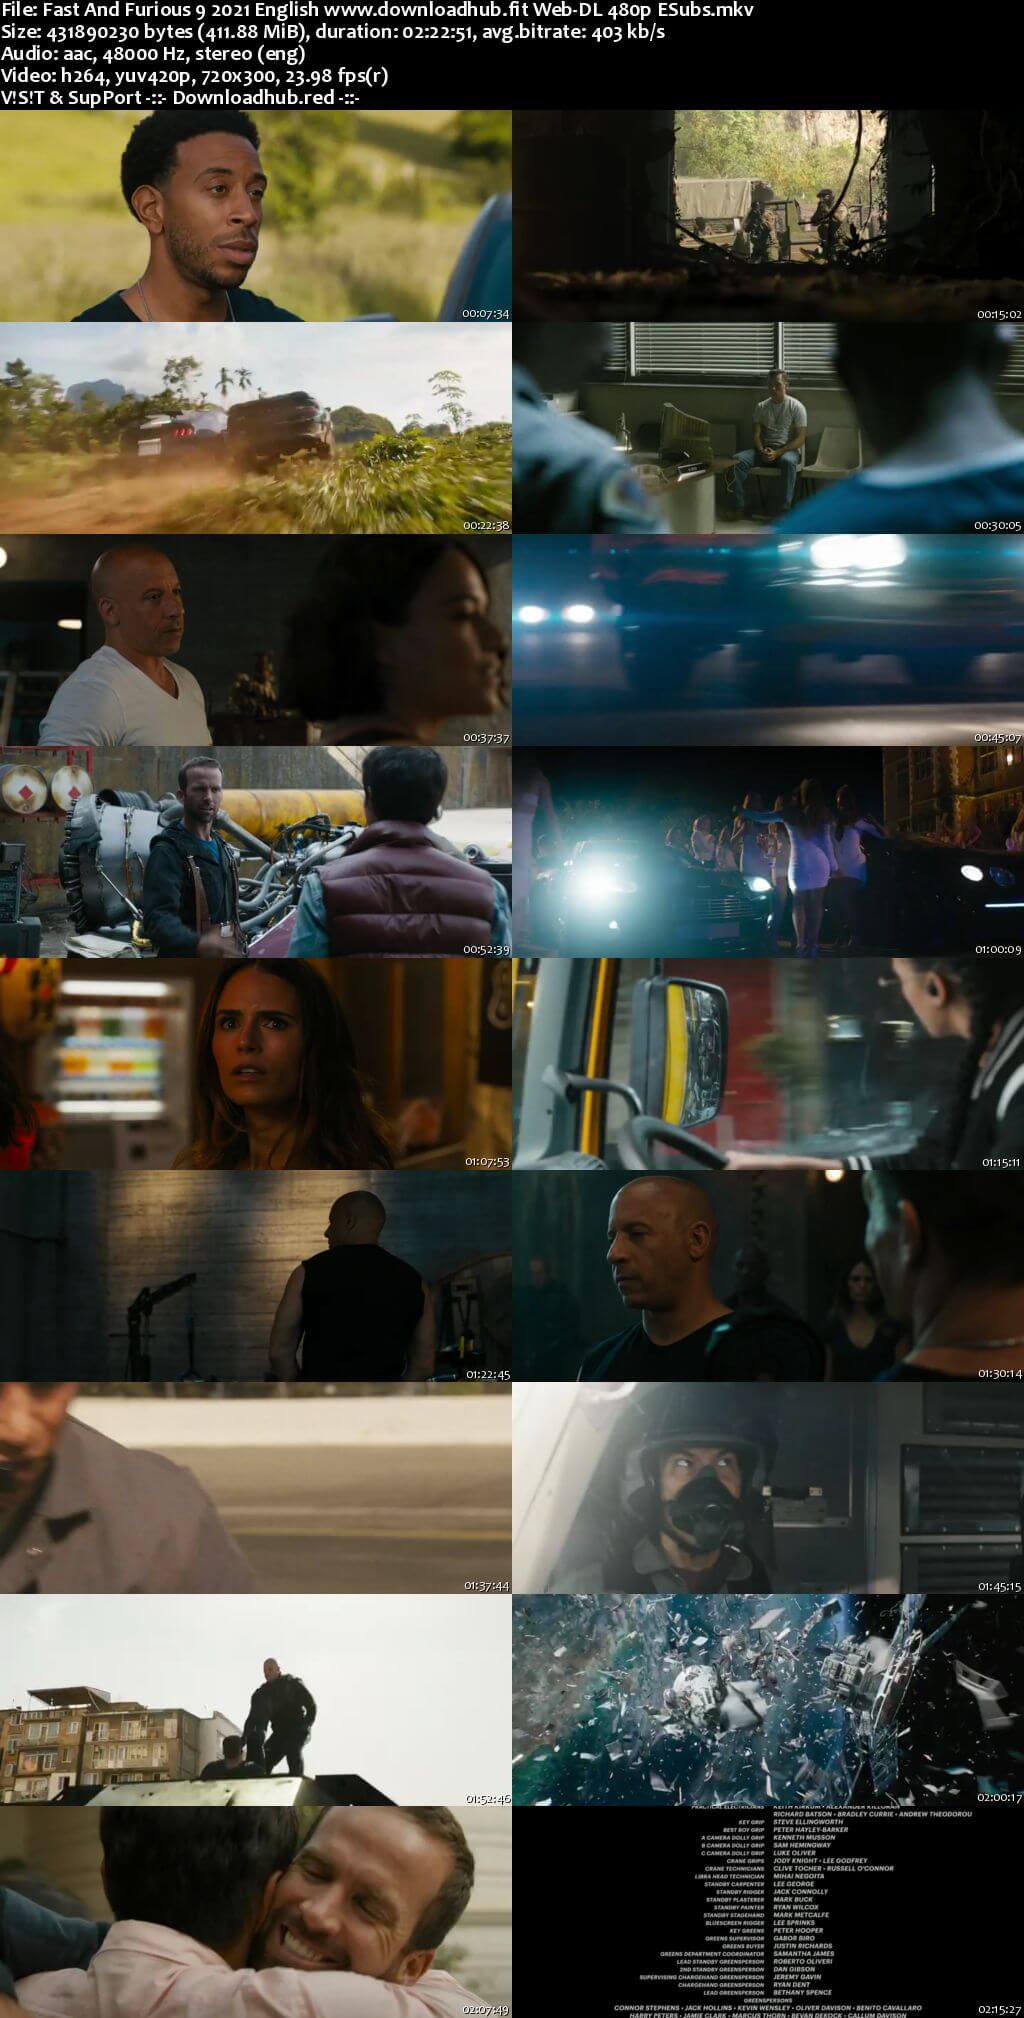 Fast And Furious 9 2021 English 400MB Web-DL 480p ESubs